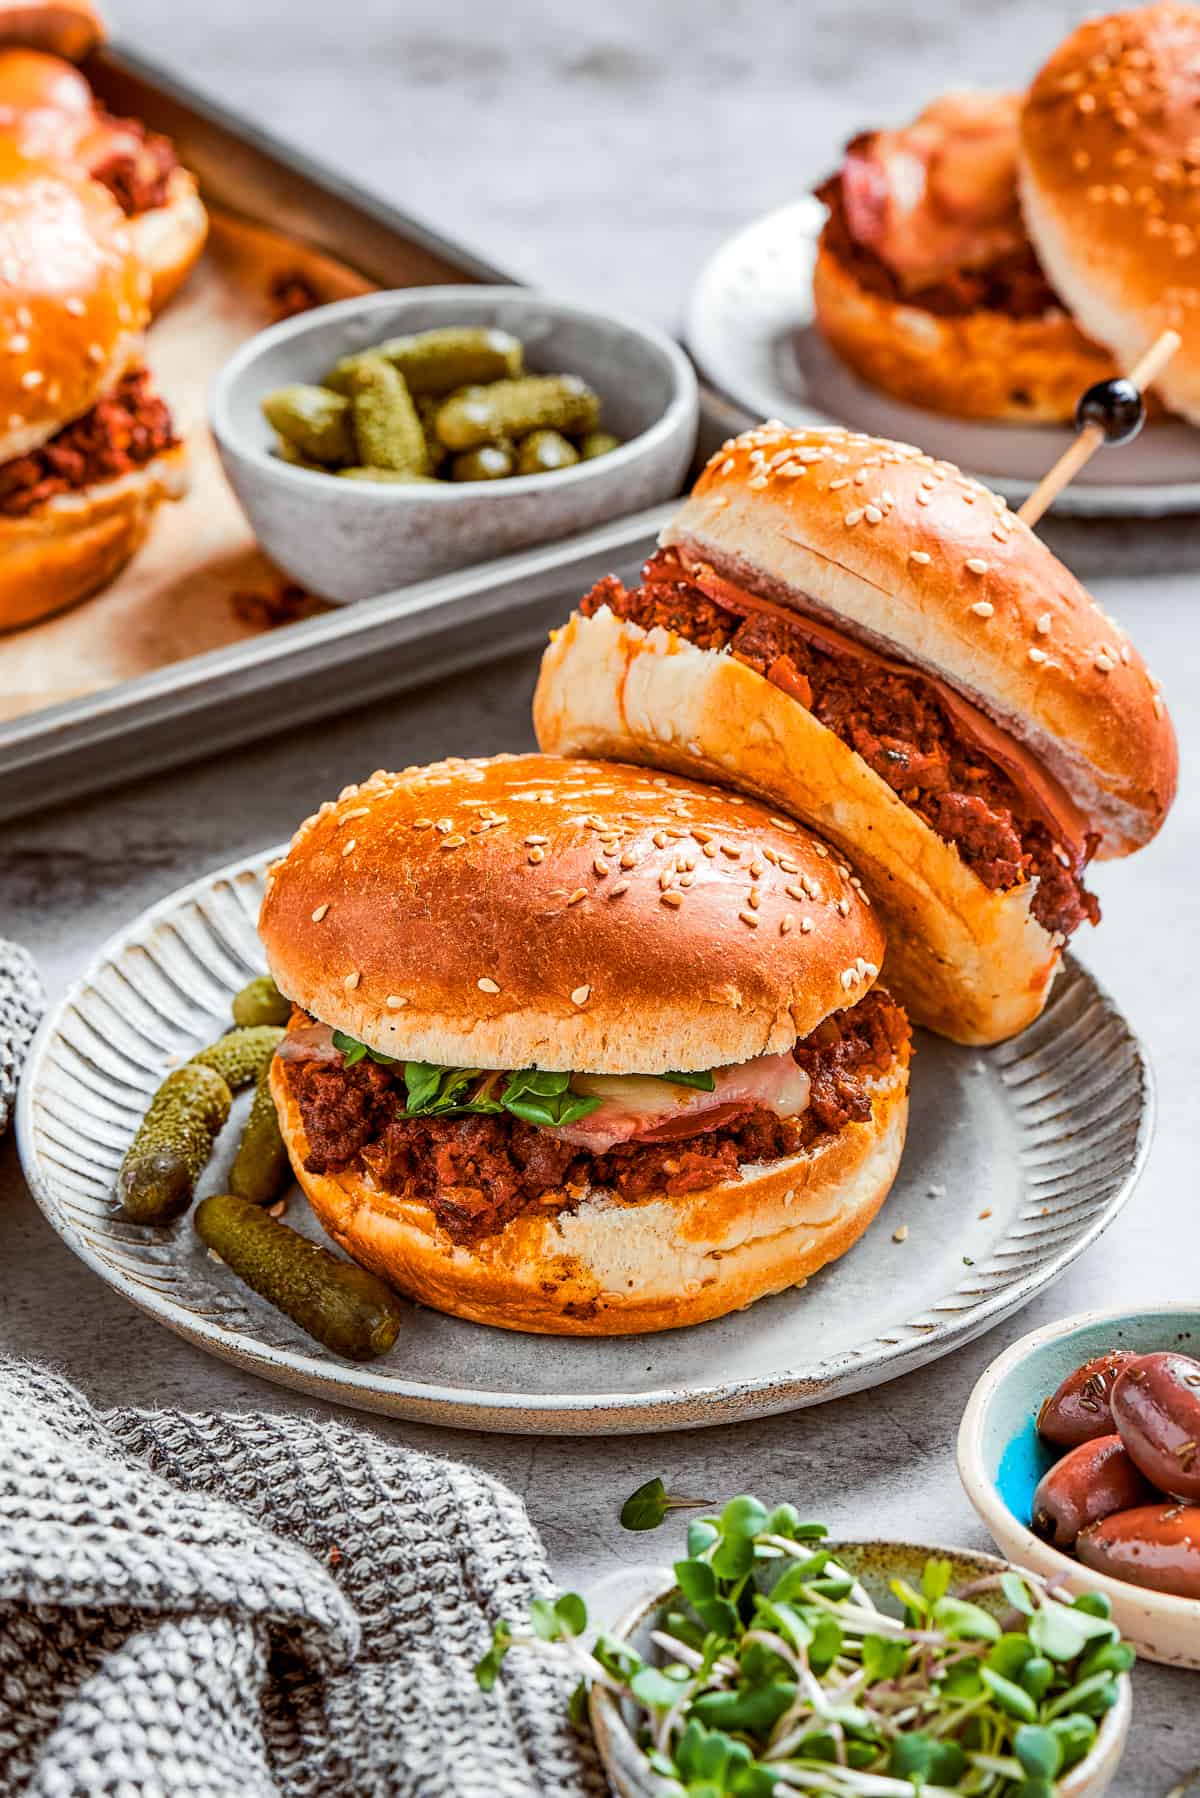 Two pizza burgers served on a plate with a few other burgers and pickles in the background.